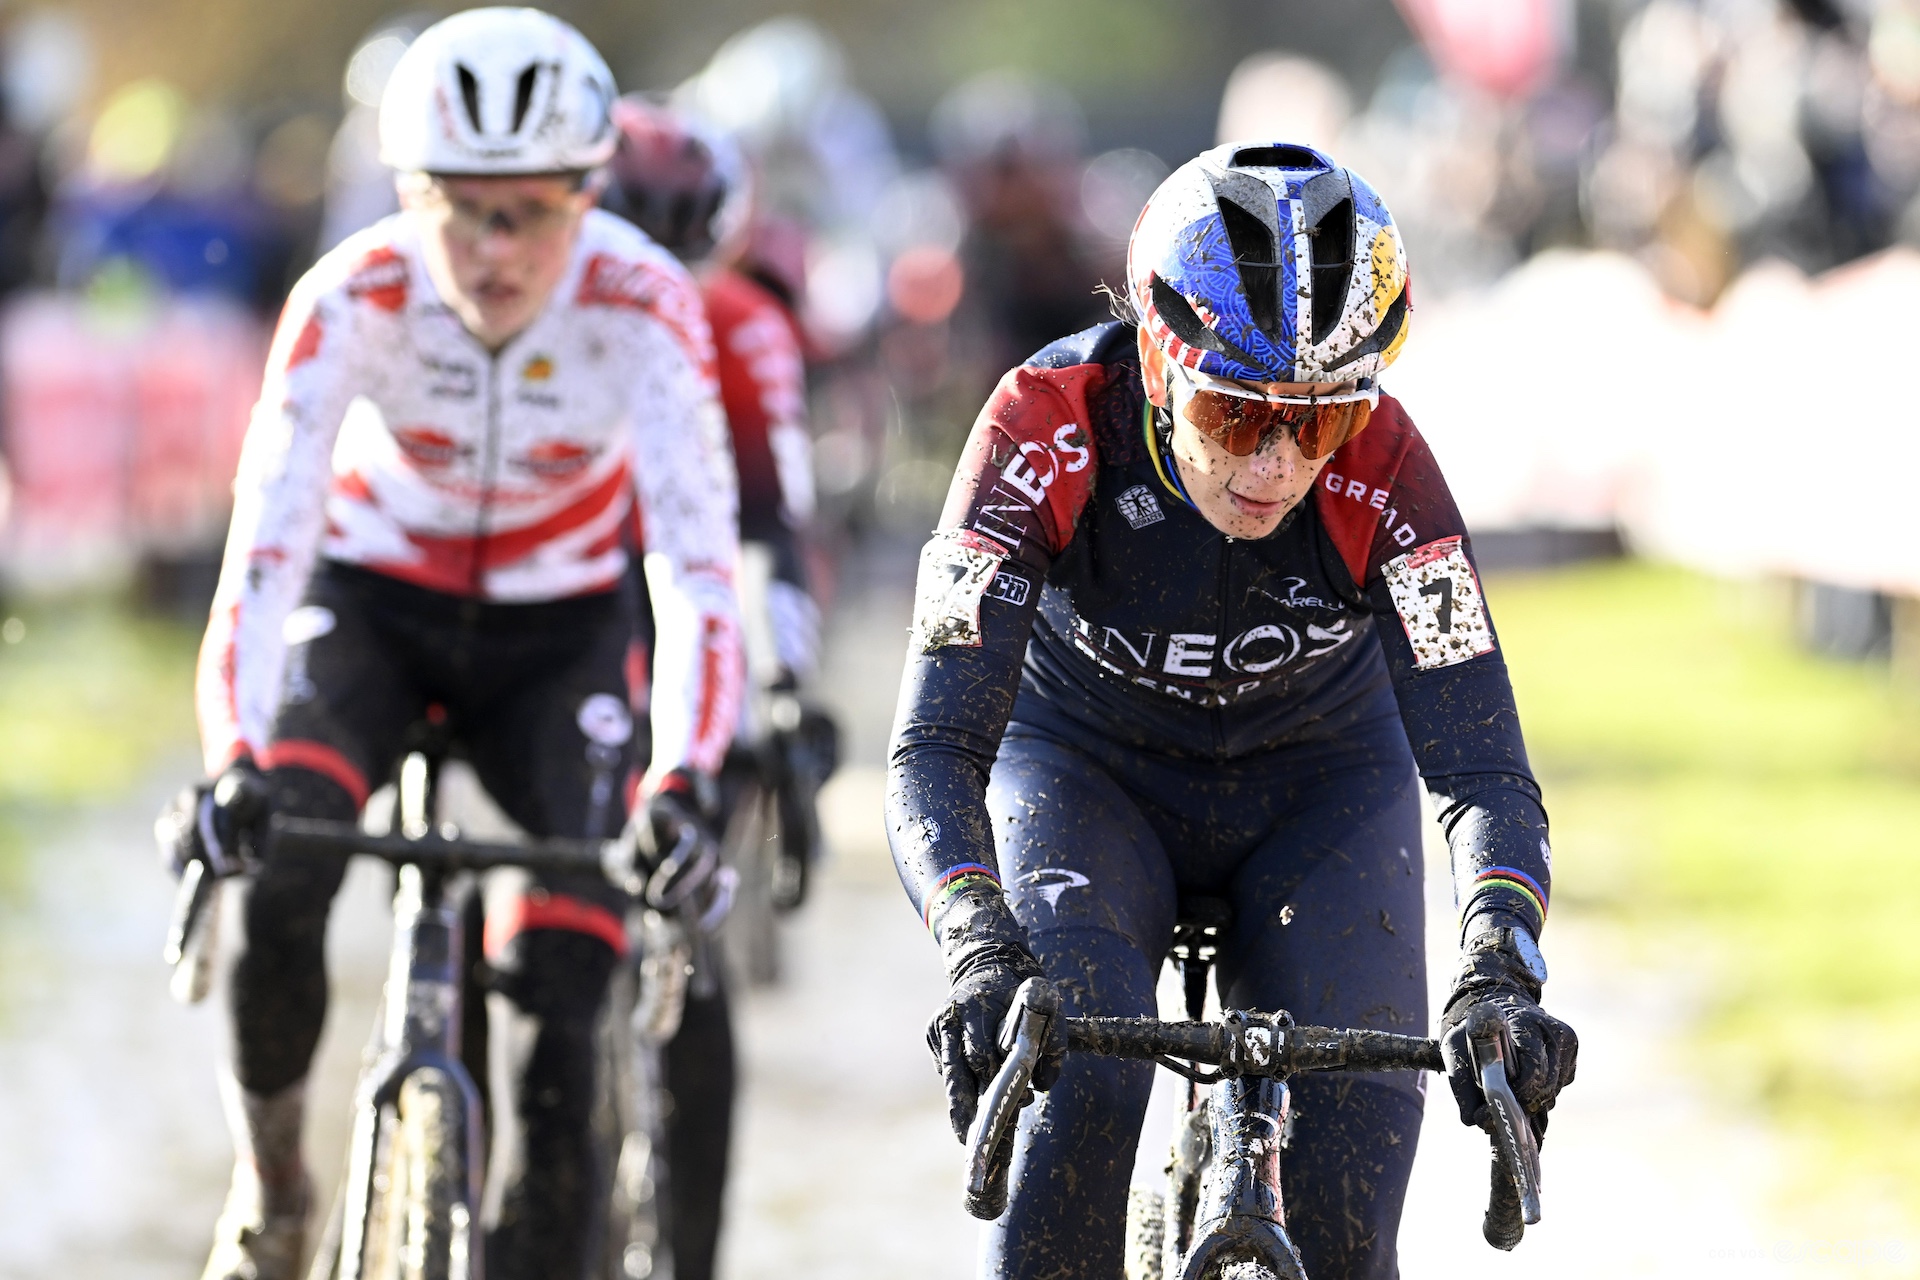 Ferrand Prevot races a muddy cyclocross race in Ineos Grenadiers kit